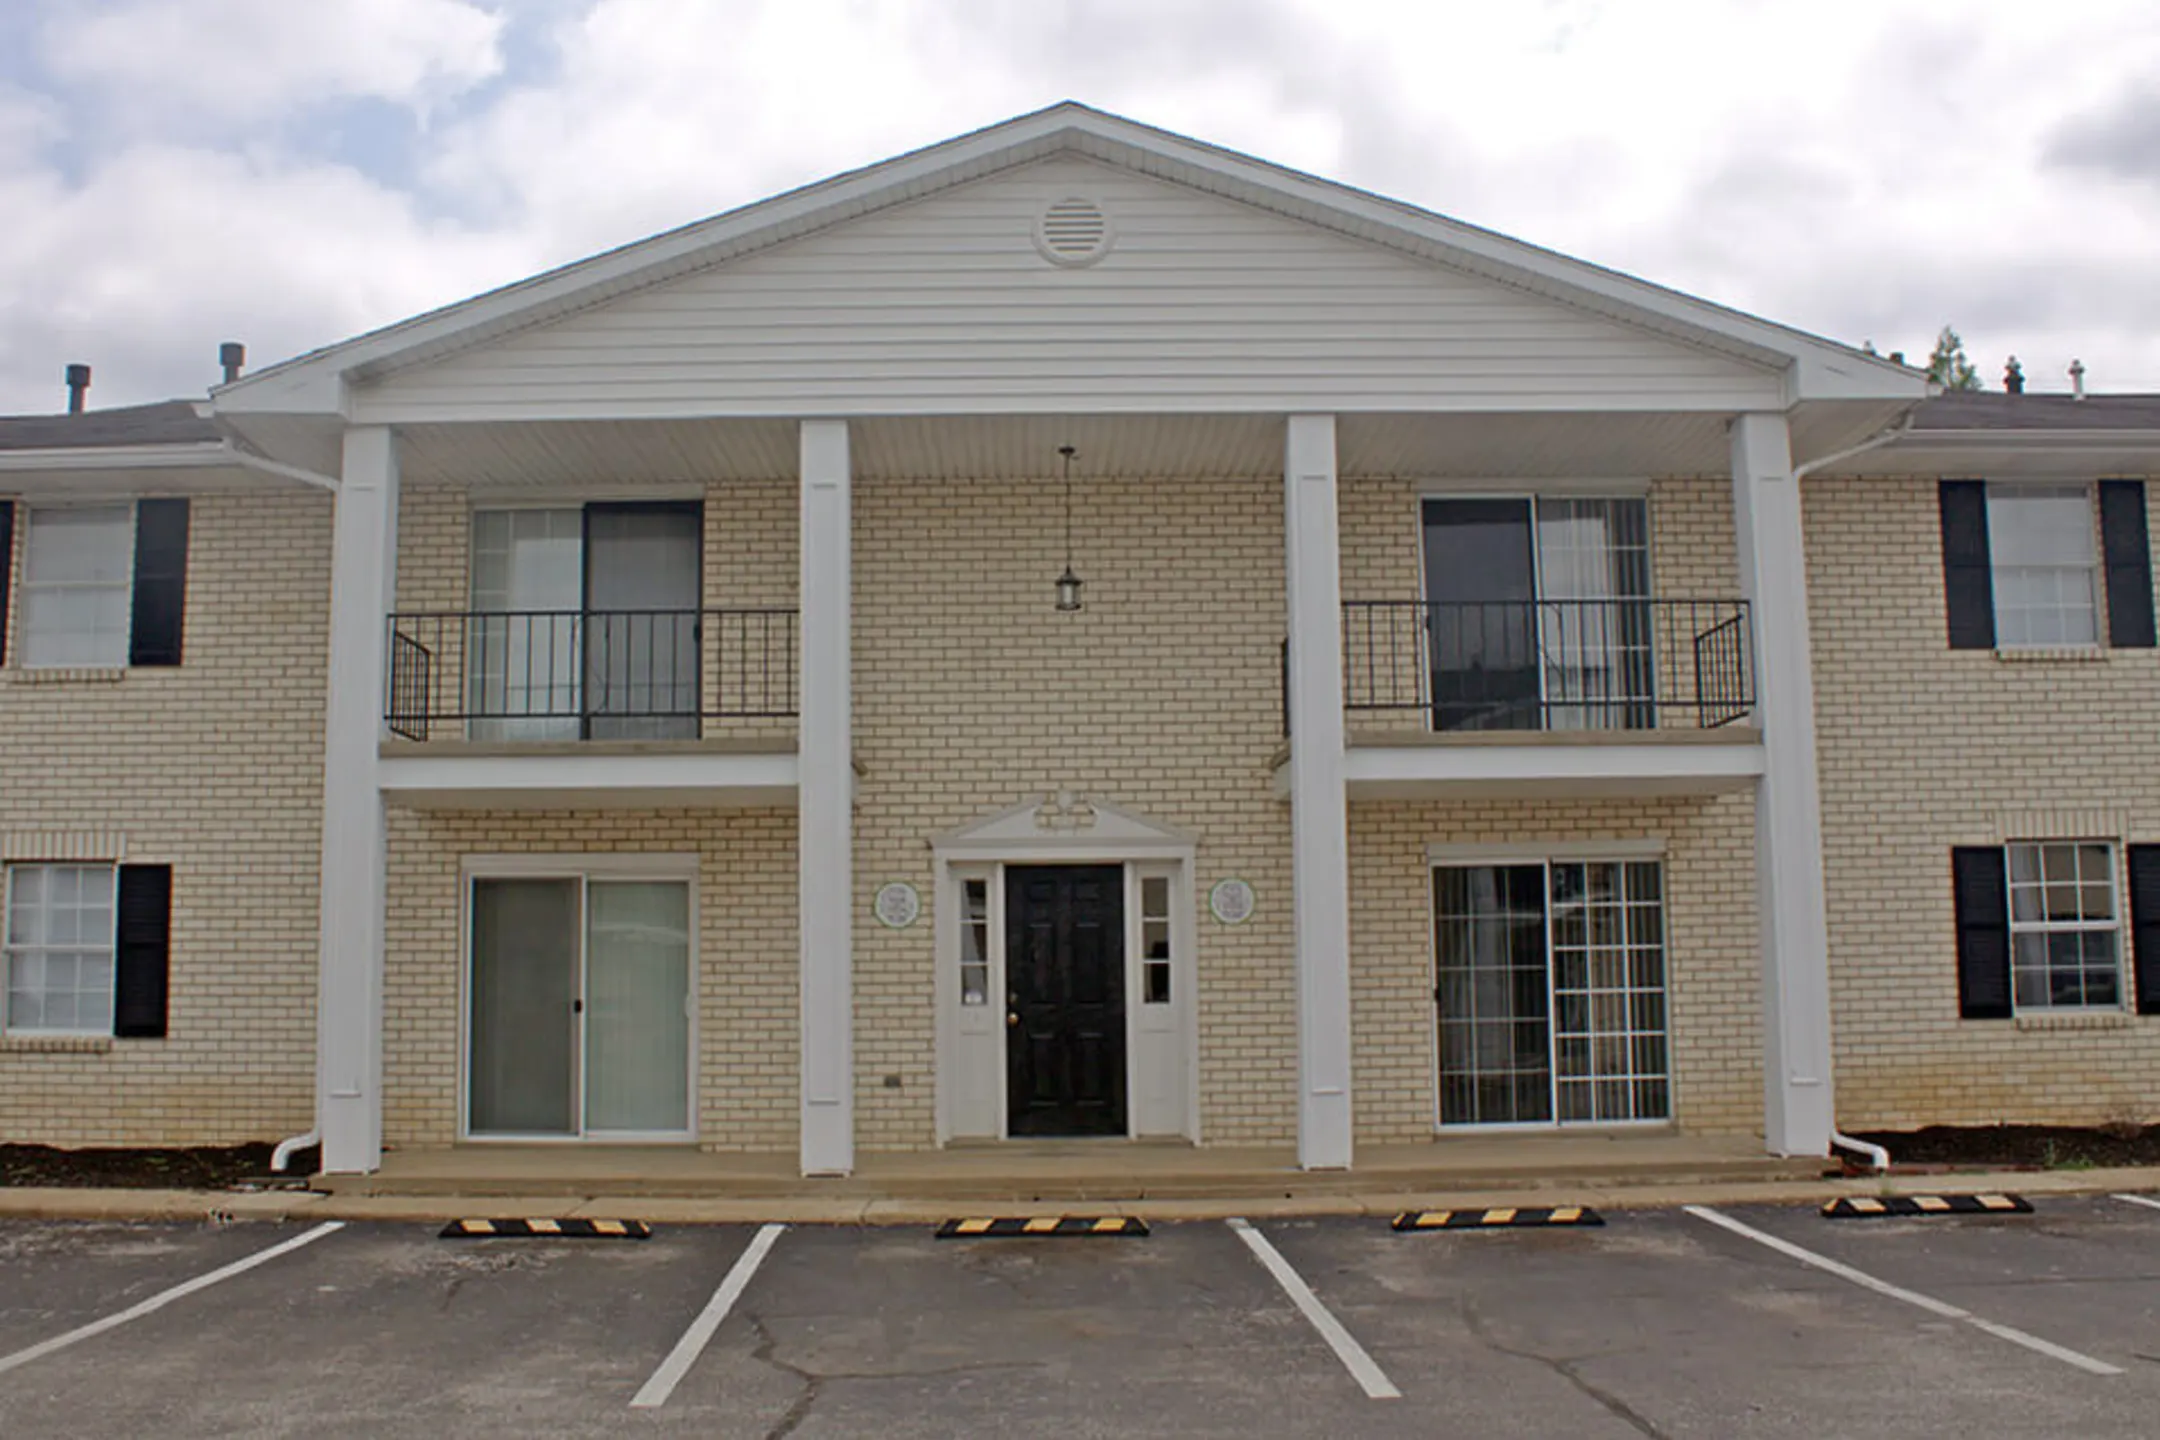 Building - Addison Place Apartments of Evansville - Evansville, IN